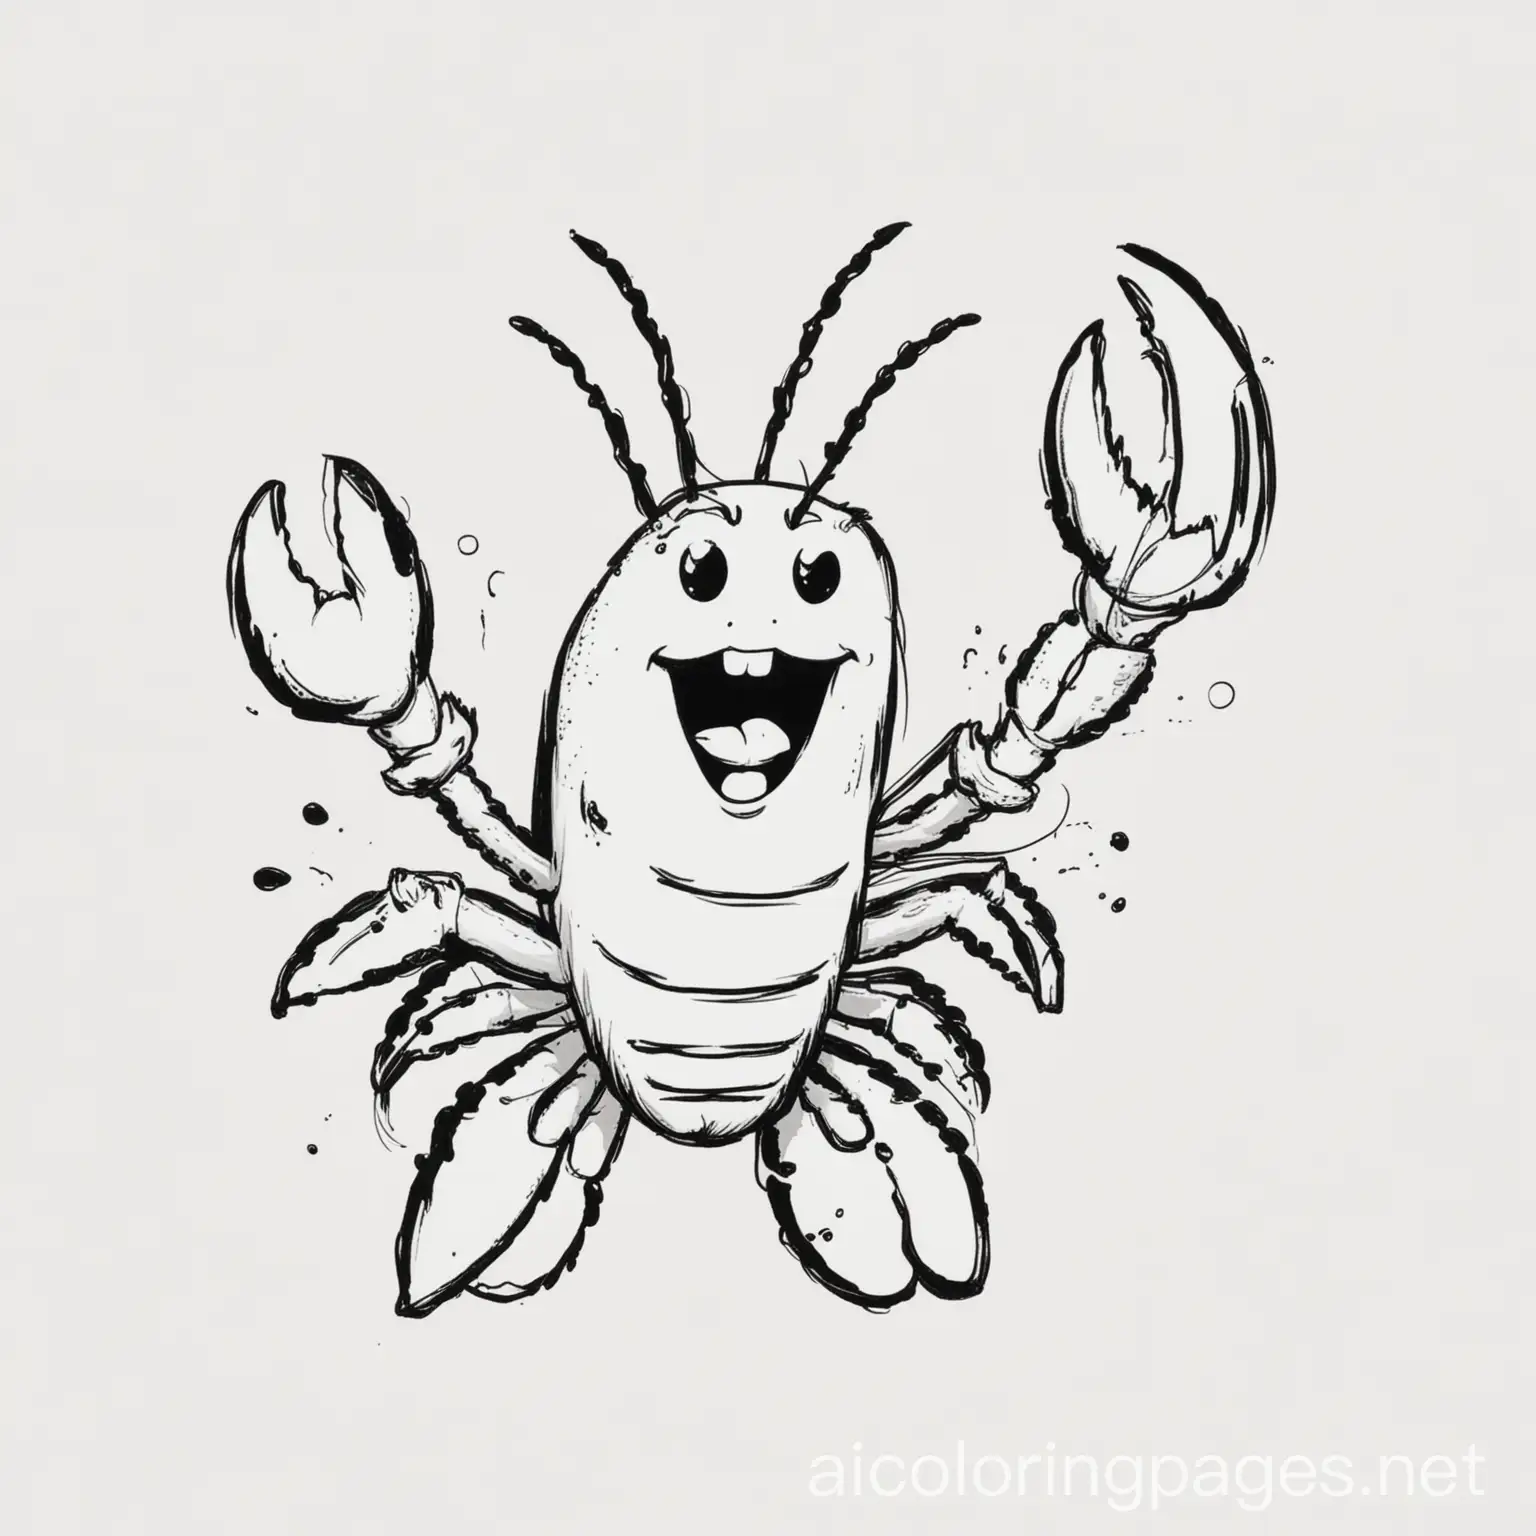 white, cute, cartoon, funny, happy, lobster
, Coloring Page, black and white, line art, white background, Simplicity, Ample White Space. The background of the coloring page is plain white to make it easy for young children to color within the lines. The outlines of all the subjects are easy to distinguish, making it simple for kids to color without too much difficulty